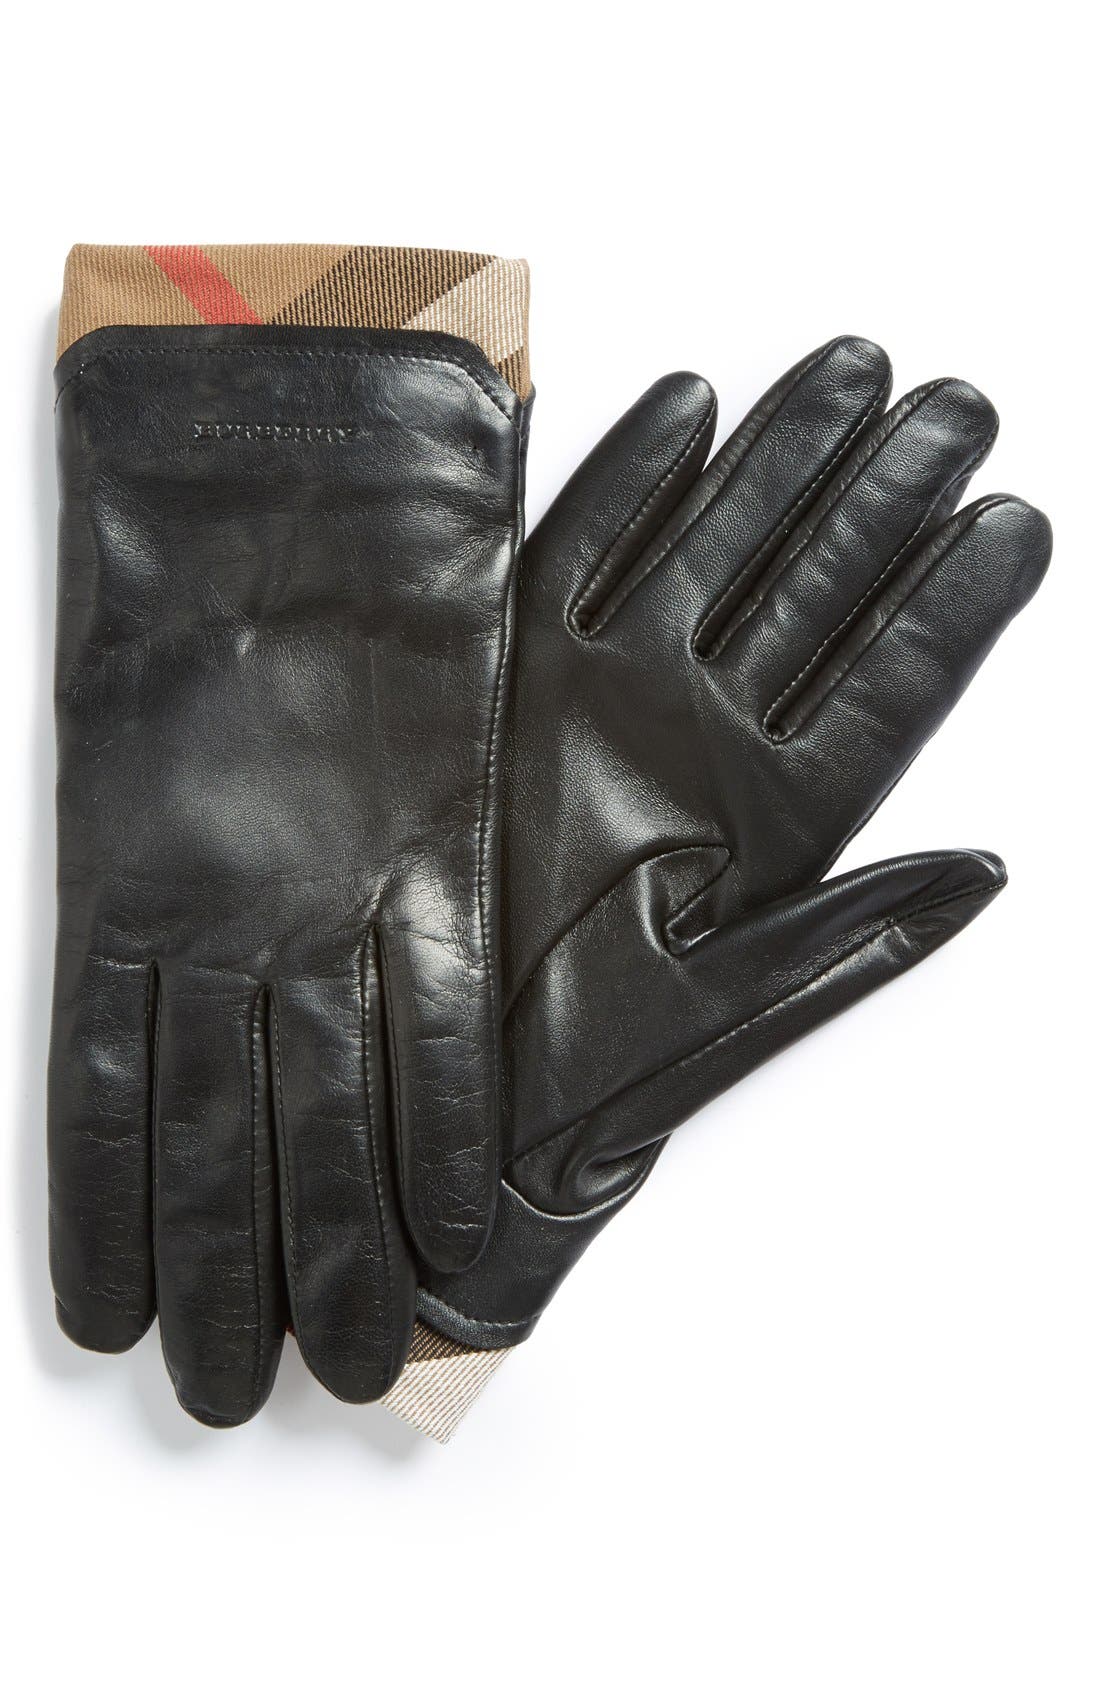 burberry house check gloves